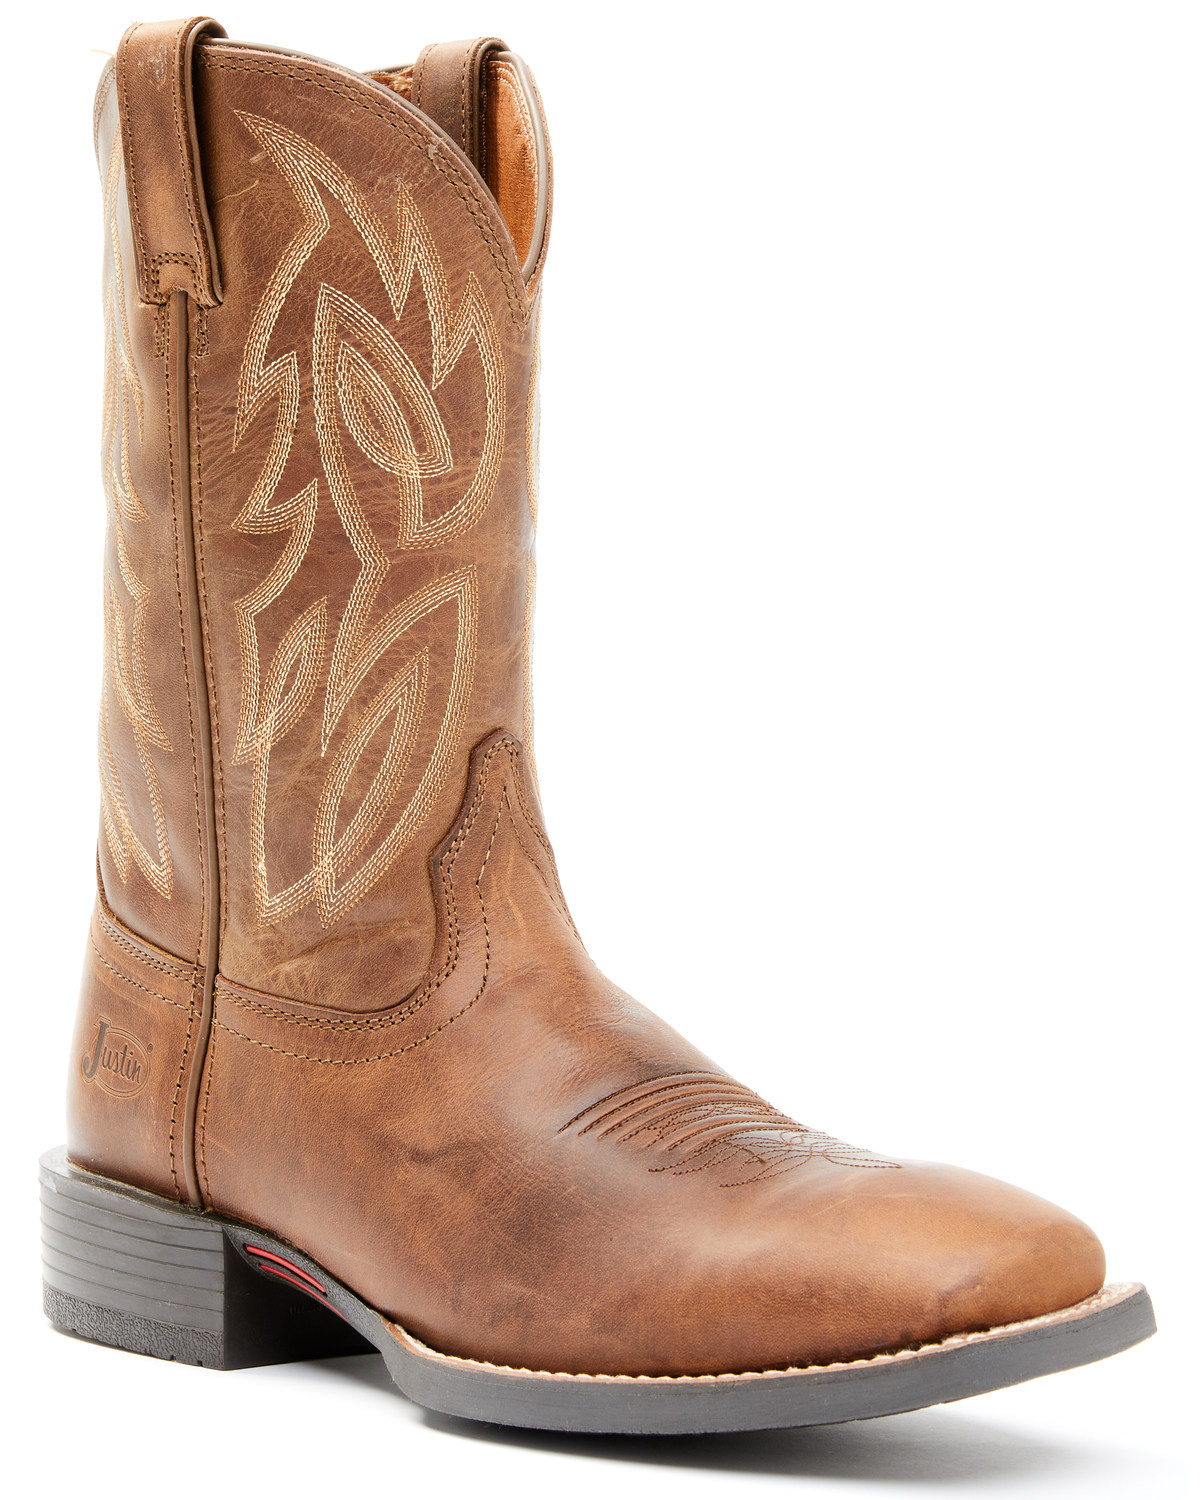 Justin Men's Dusky Brown Canter Cowhide Leather Western Boots - Broad Square Toe